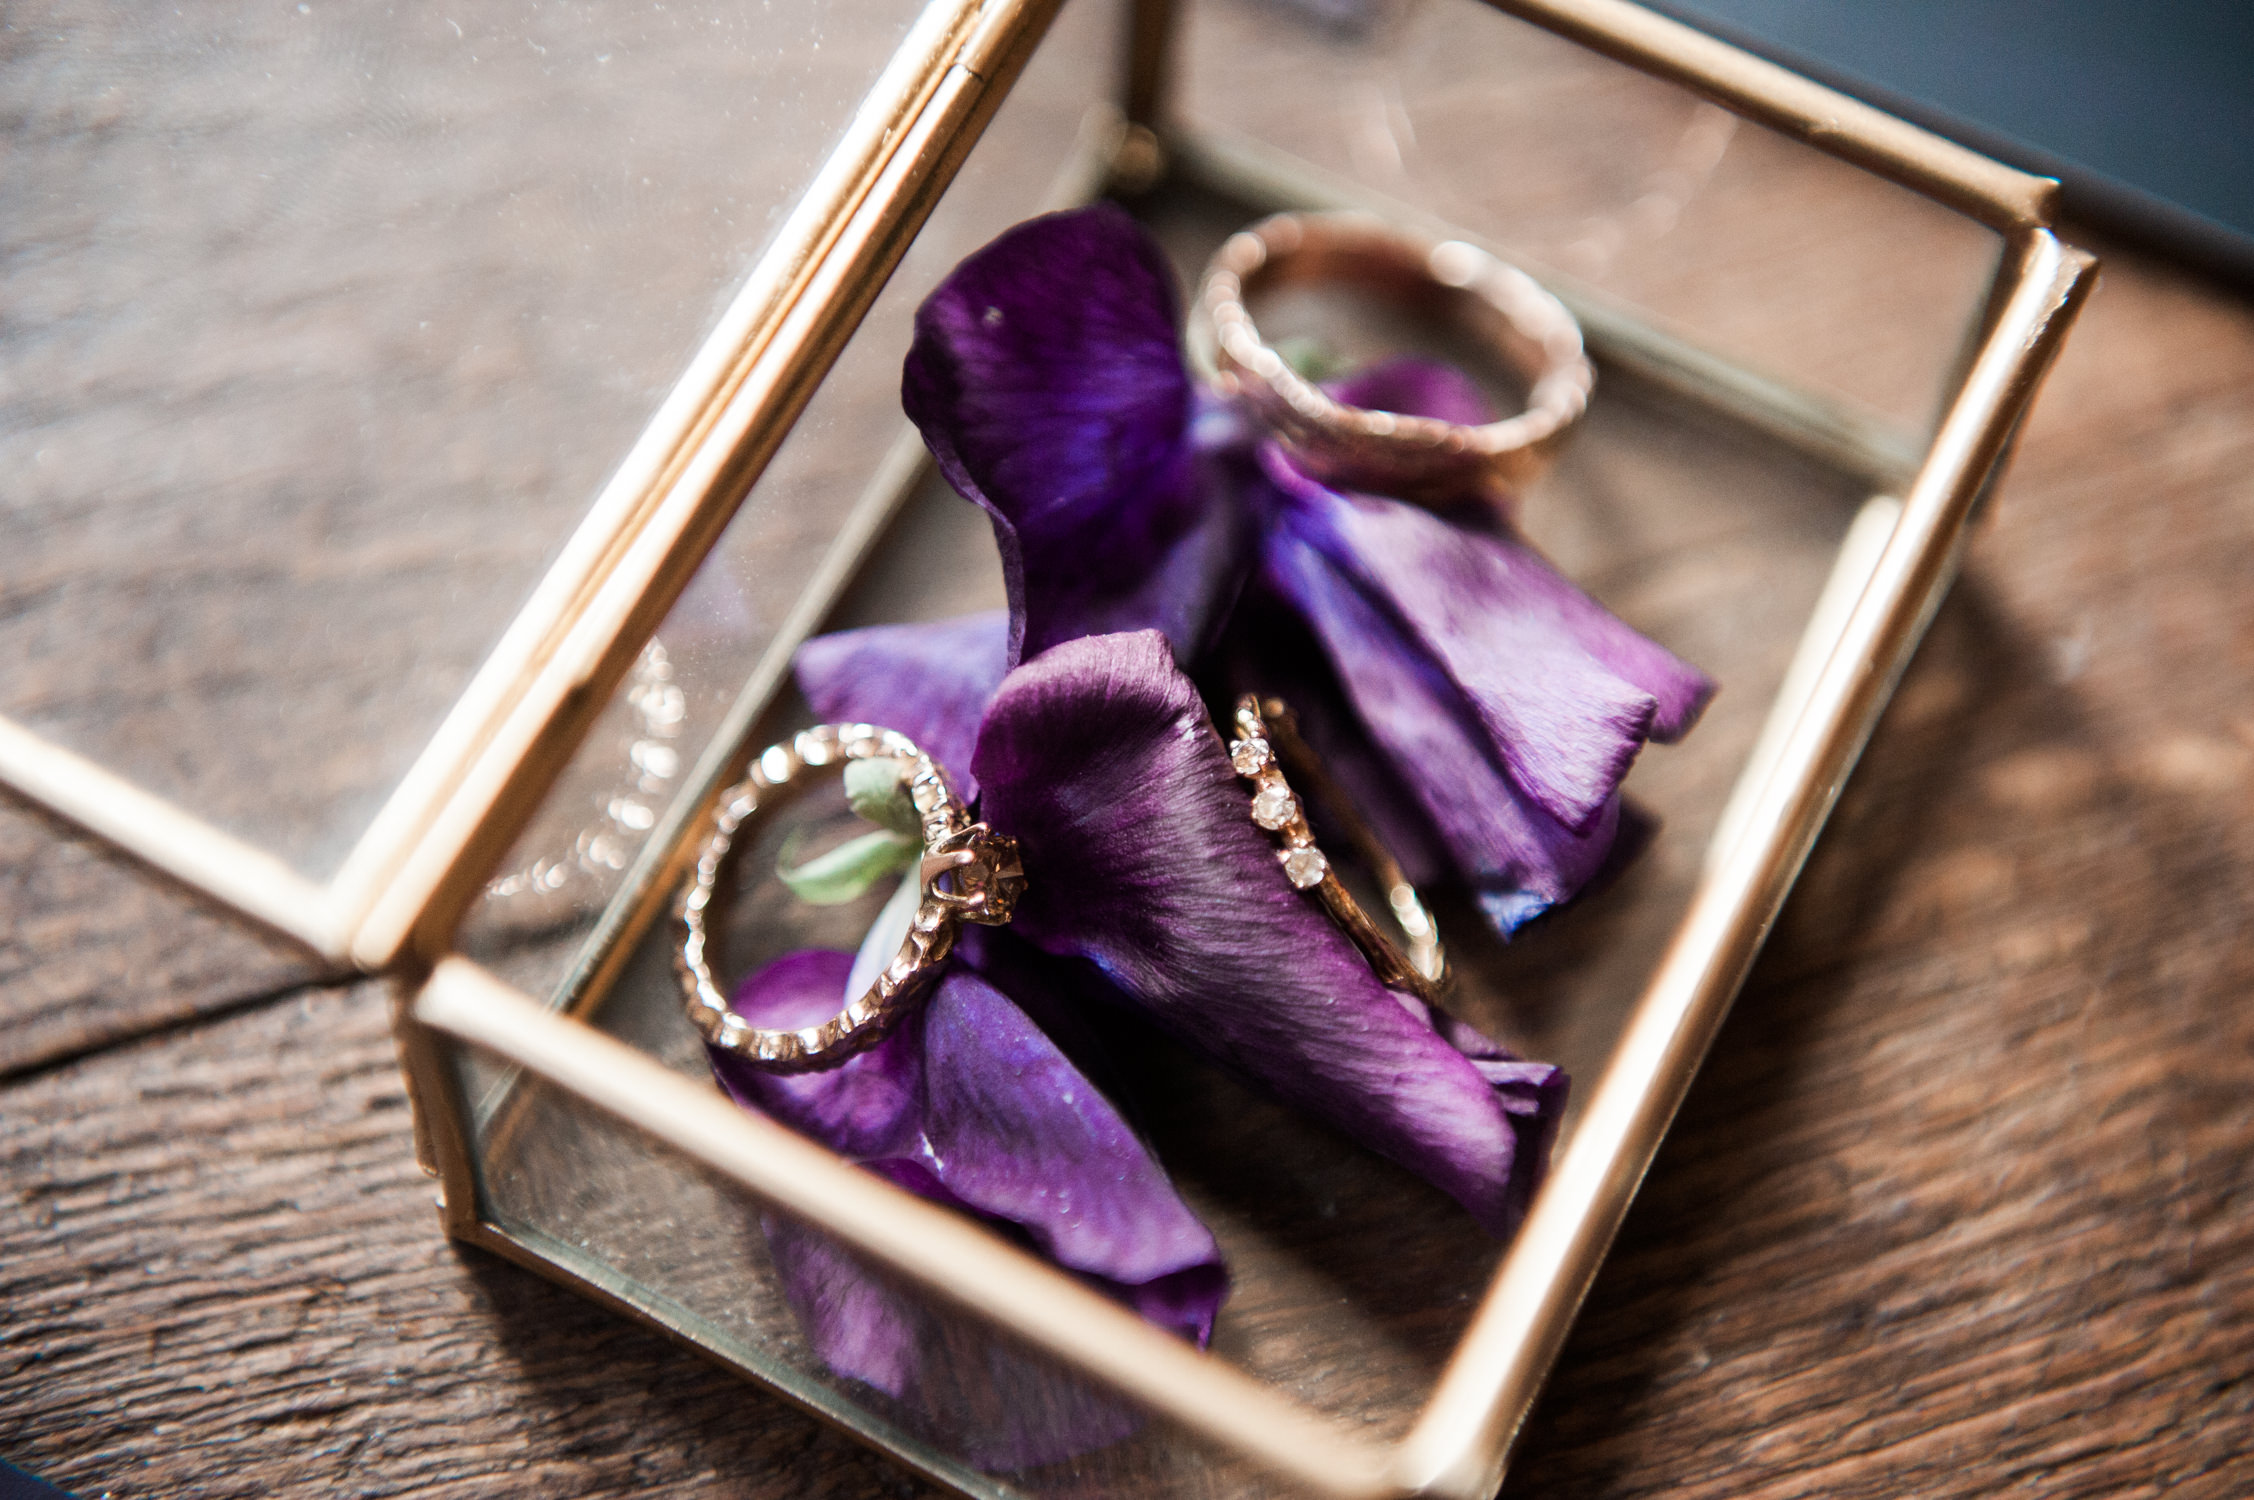 Wedding rings by Nadine Kit Jewellery captured by a wedding photographer in France